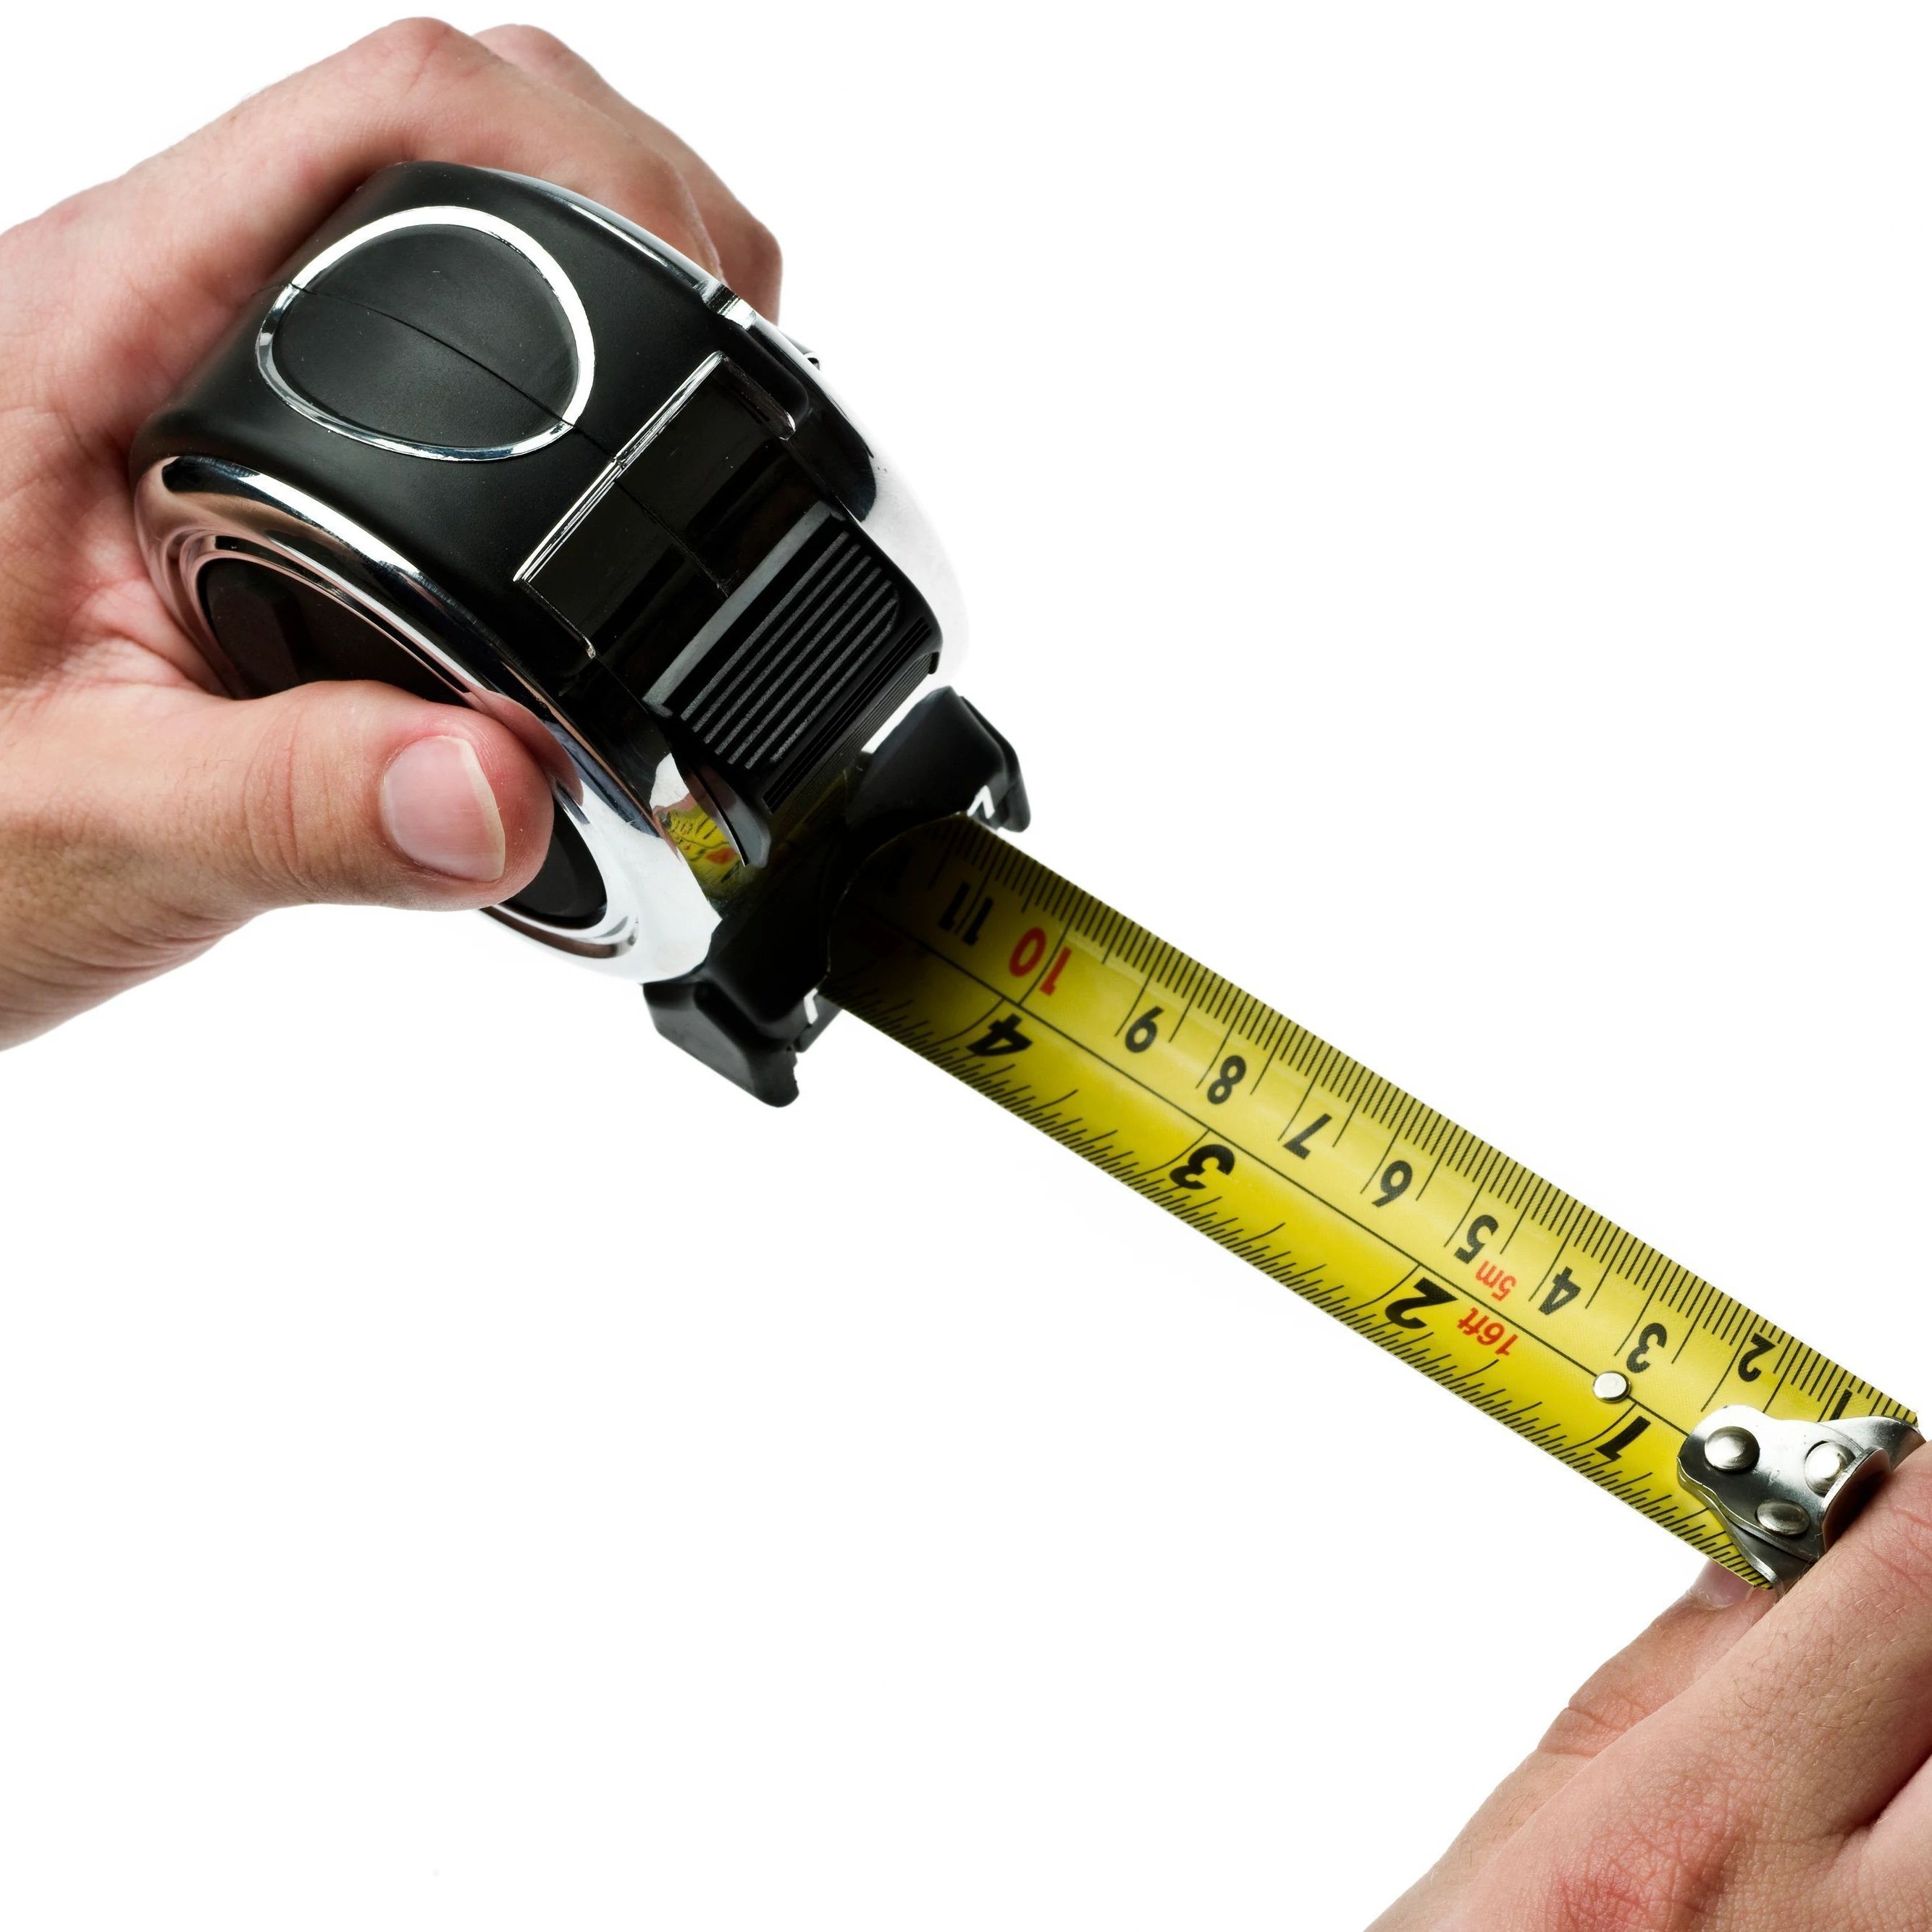 Measuring tape from Carpet Clearance Warehouse in Keene